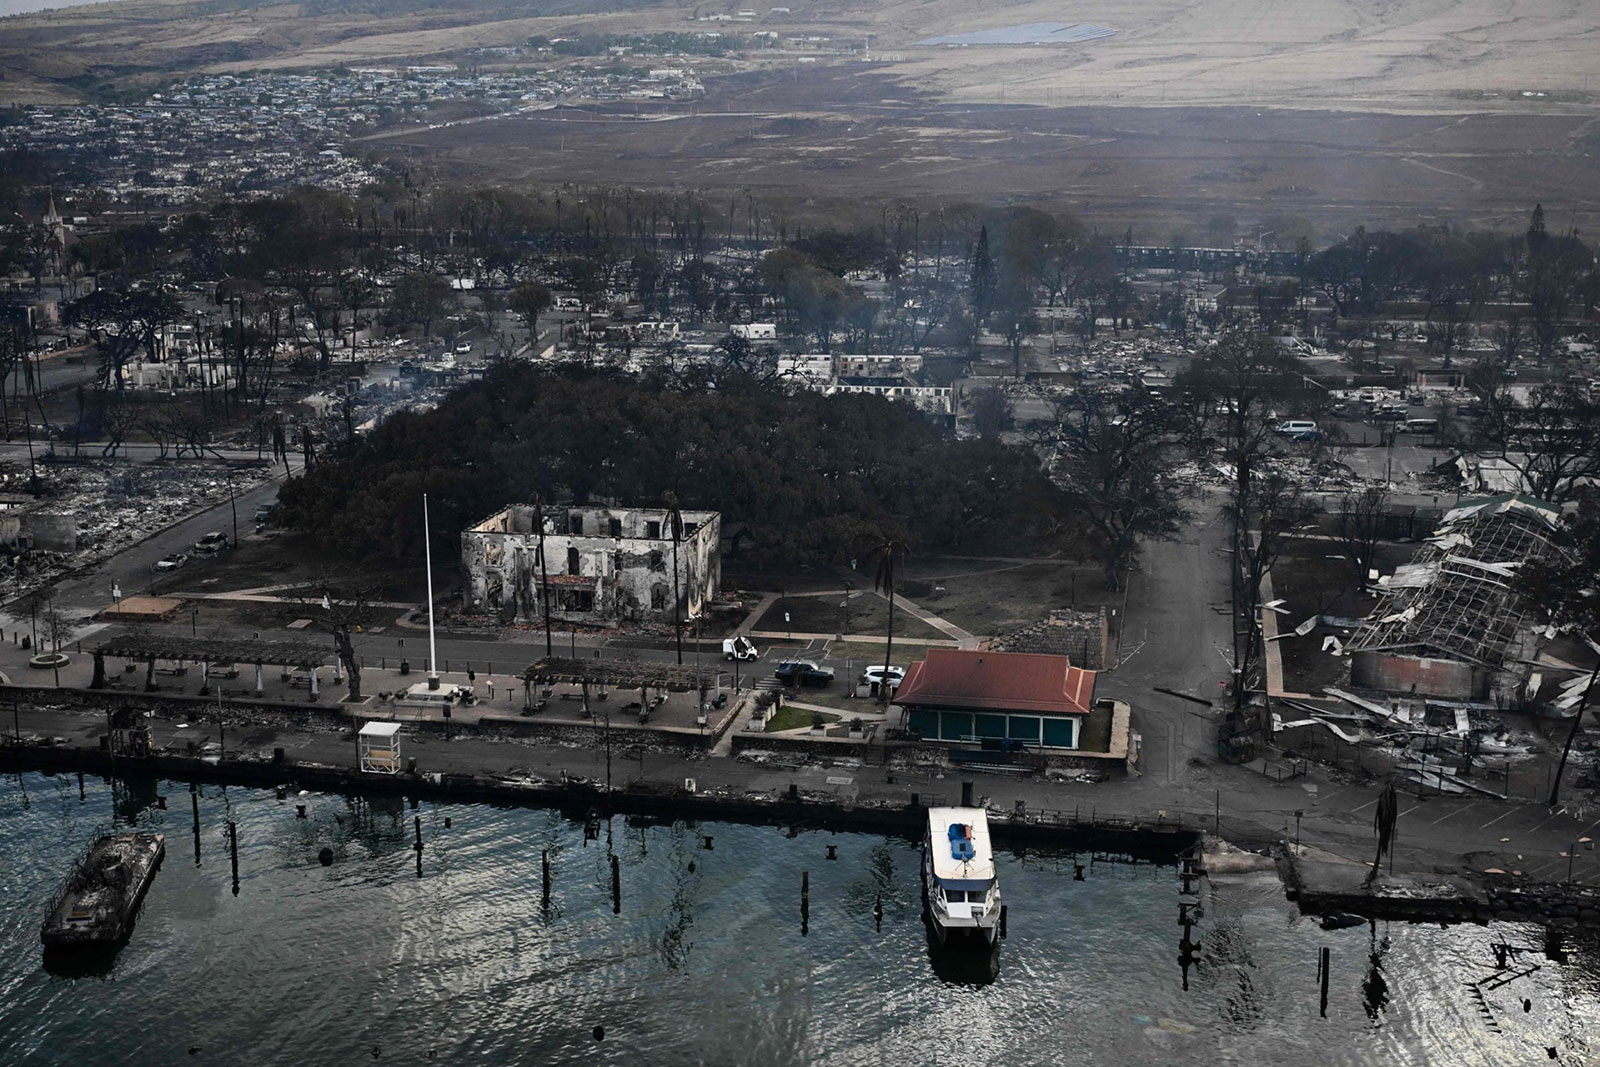 An aerial view shows the historic Banyan Tree along with destroyed homes, boats, and buildings burned to the ground on August 10.